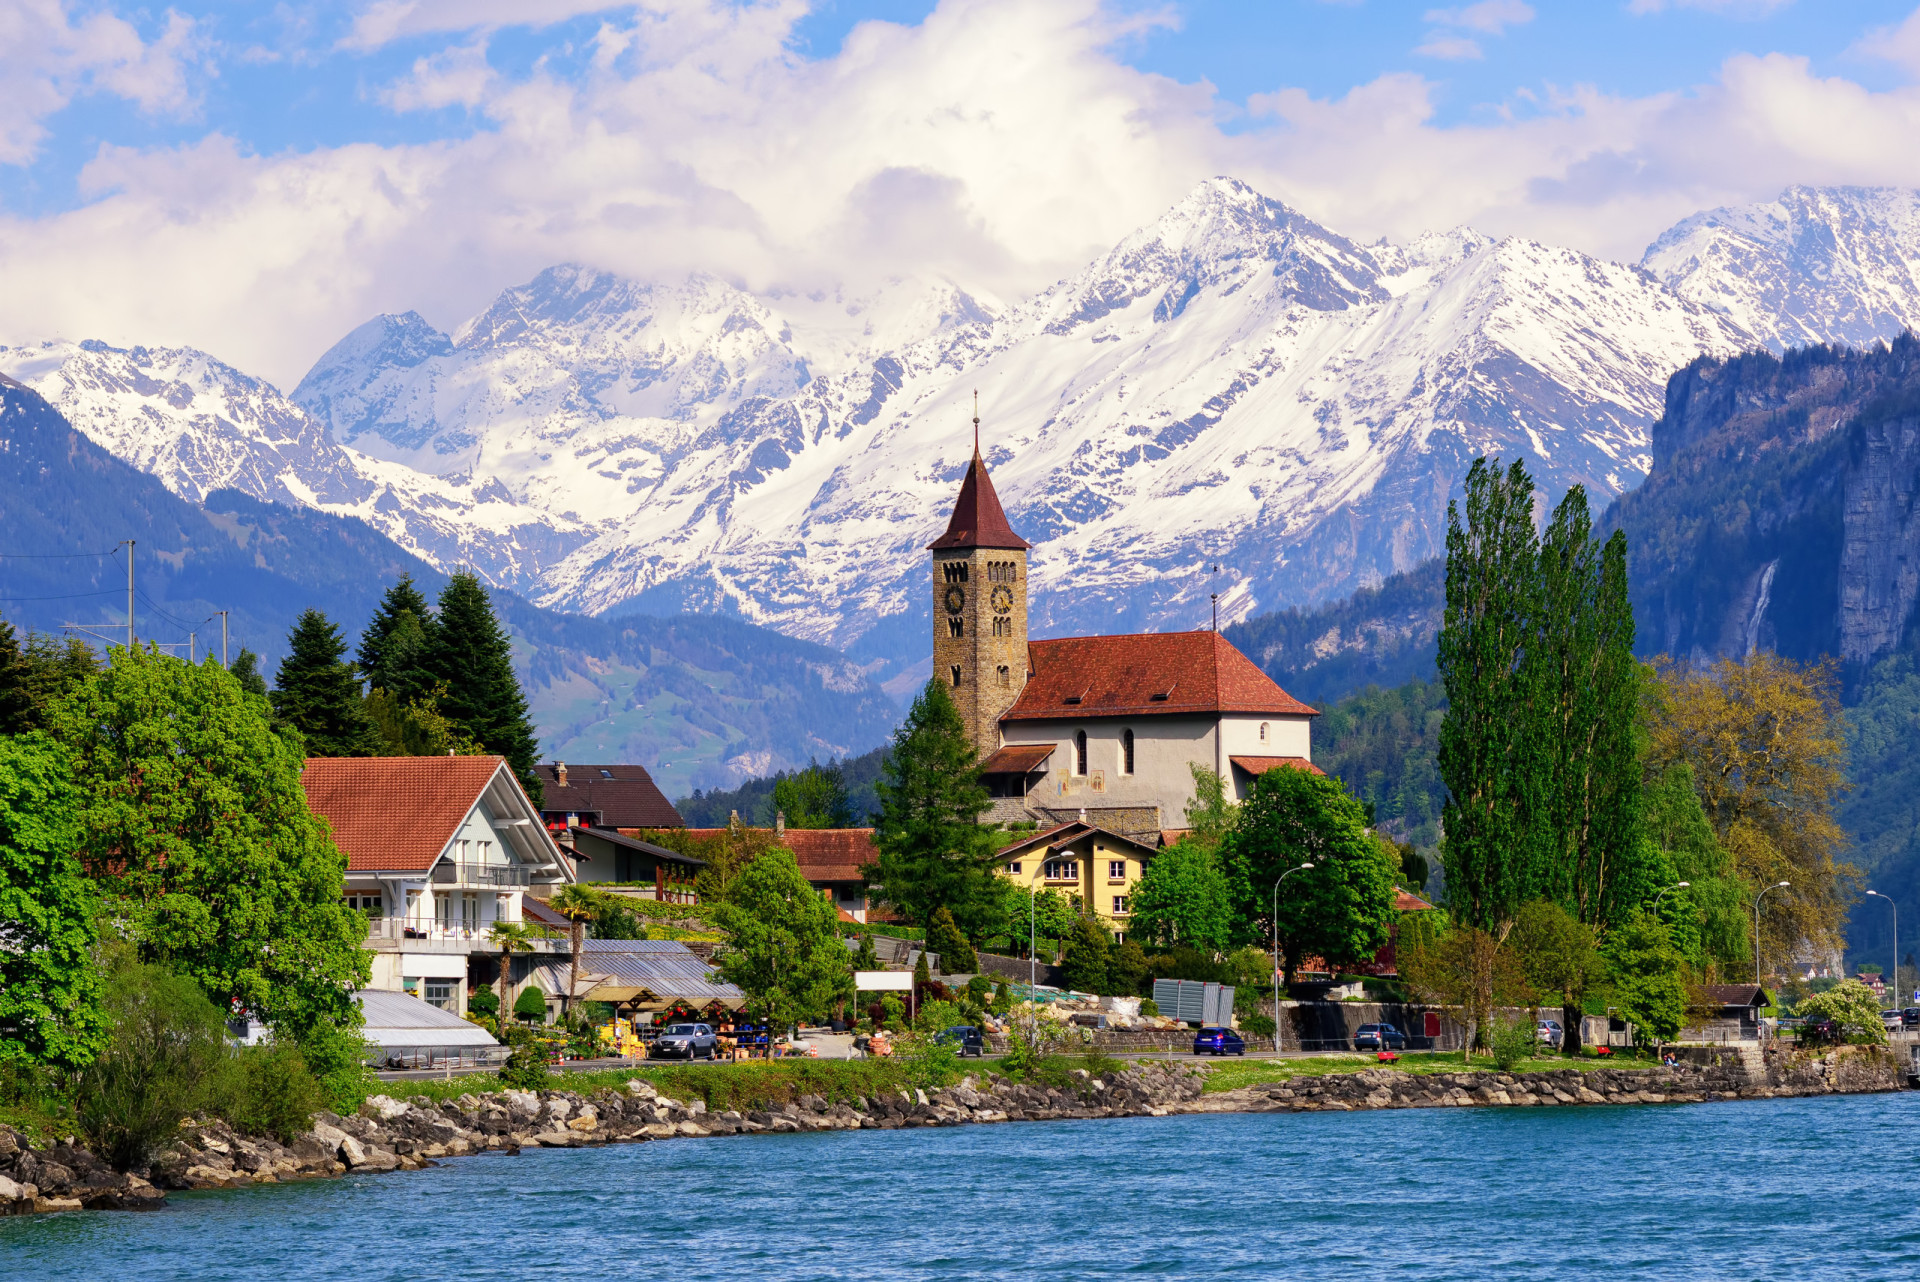 <p>Switzerland's tourist tax also varies depending on the location. A common amount is 2.50 Swiss francs (US$2.50) per night.</p><p>You may also like:<a href="https://www.starsinsider.com/n/377464?utm_source=msn.com&utm_medium=display&utm_campaign=referral_description&utm_content=683460en-ph"> Tom Cruise: a look at his life, loves, and career</a></p>